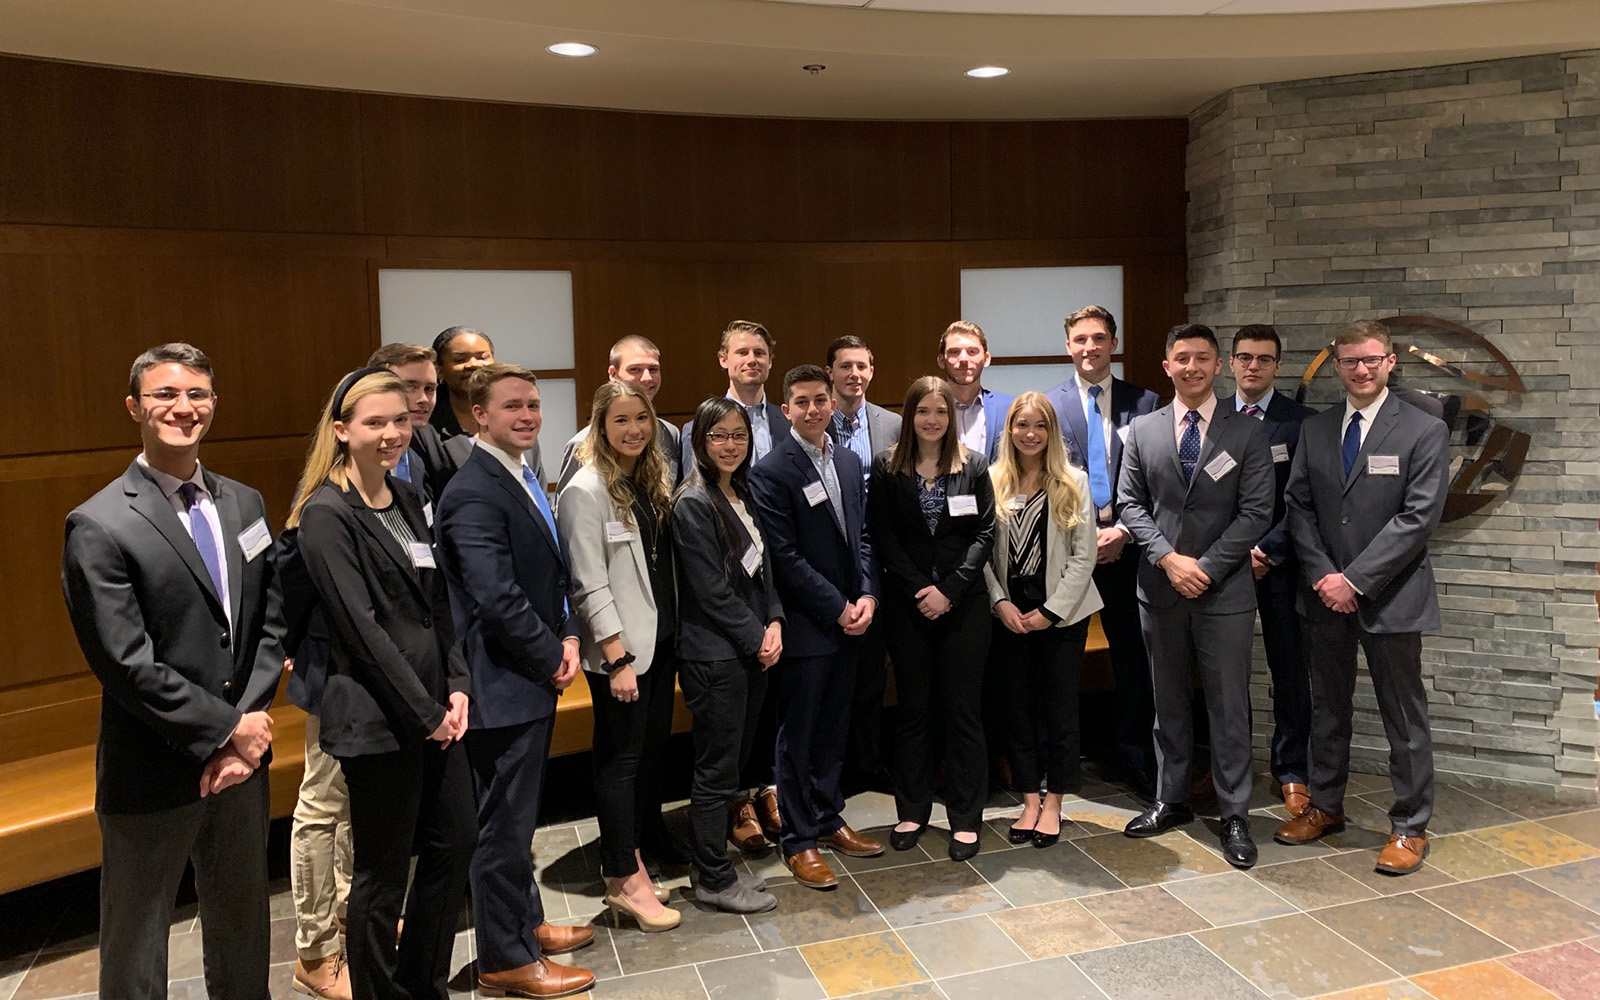 Second year students from UConn’s School of Business pose during their visit to Prudential for the yearly Immersion Bootcamp, where students have an opportunity to fine tune skills in a real-time environment. (Contributed Photo)